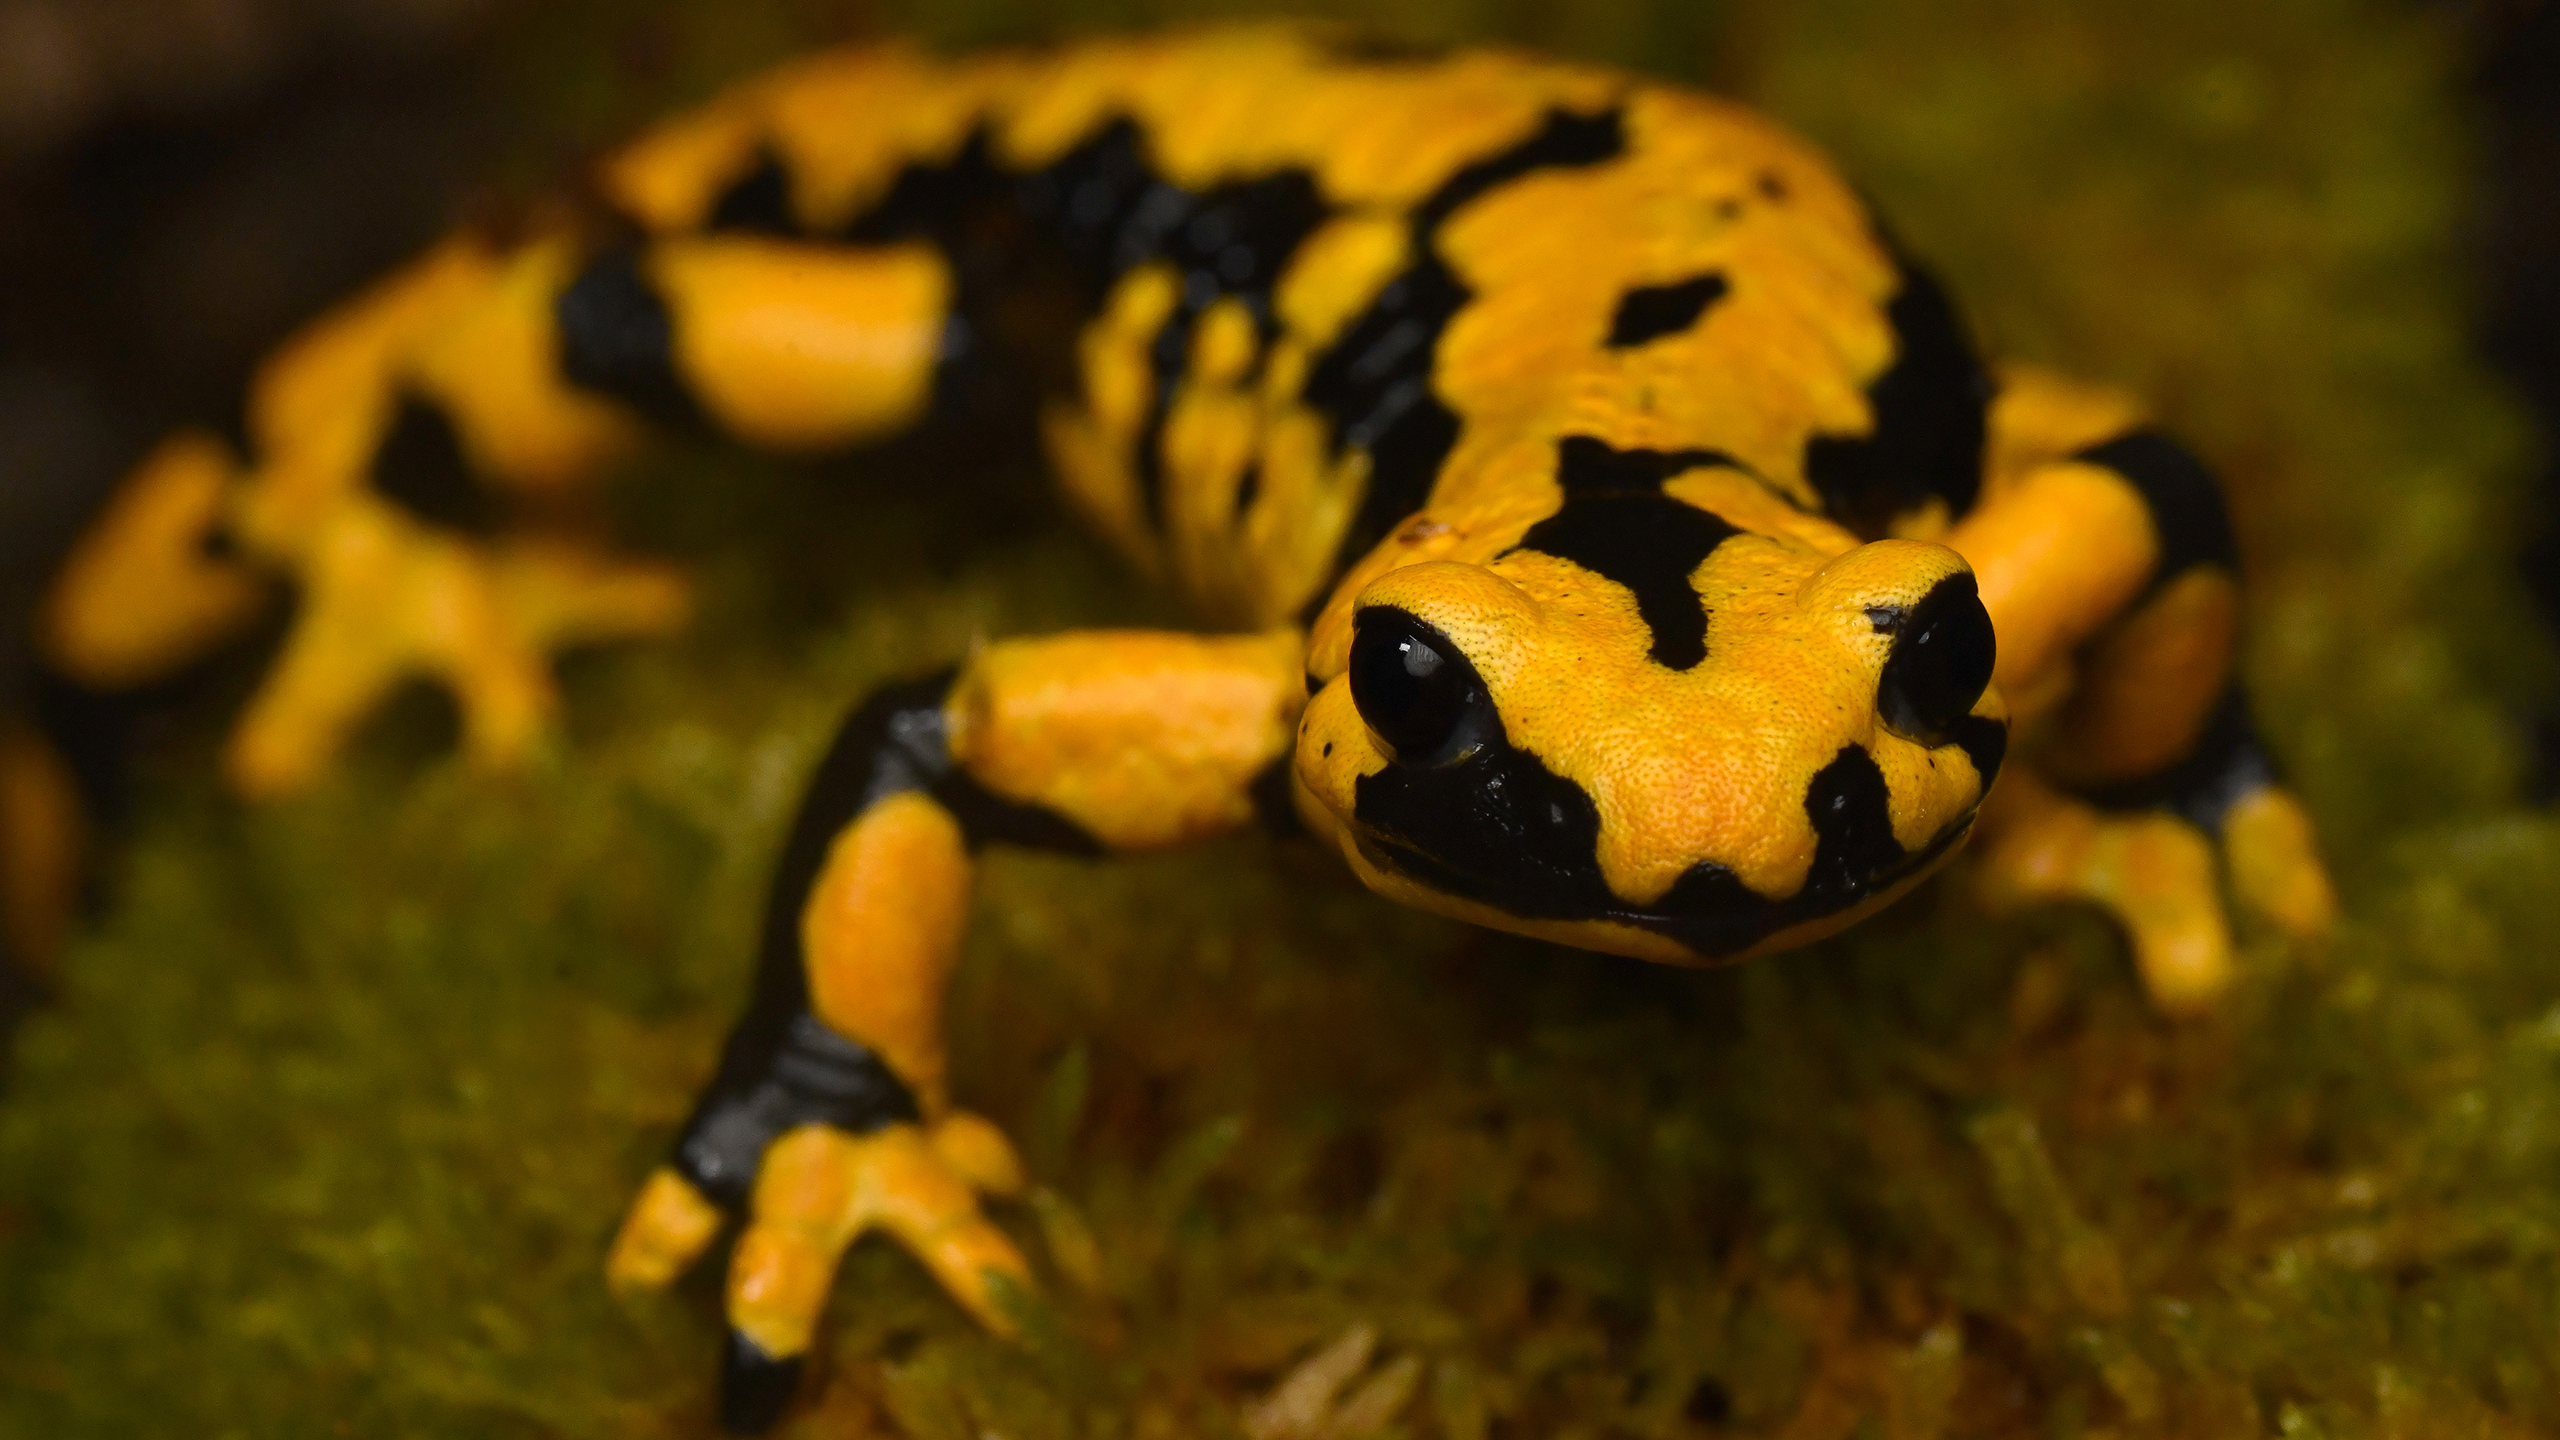 In addition to the individual ones, there are also regional differences. In Solling, there are particularly many fire salamanders (Salamandra s. terrestris) with a high proportion of yellow. | Miguel Vences 